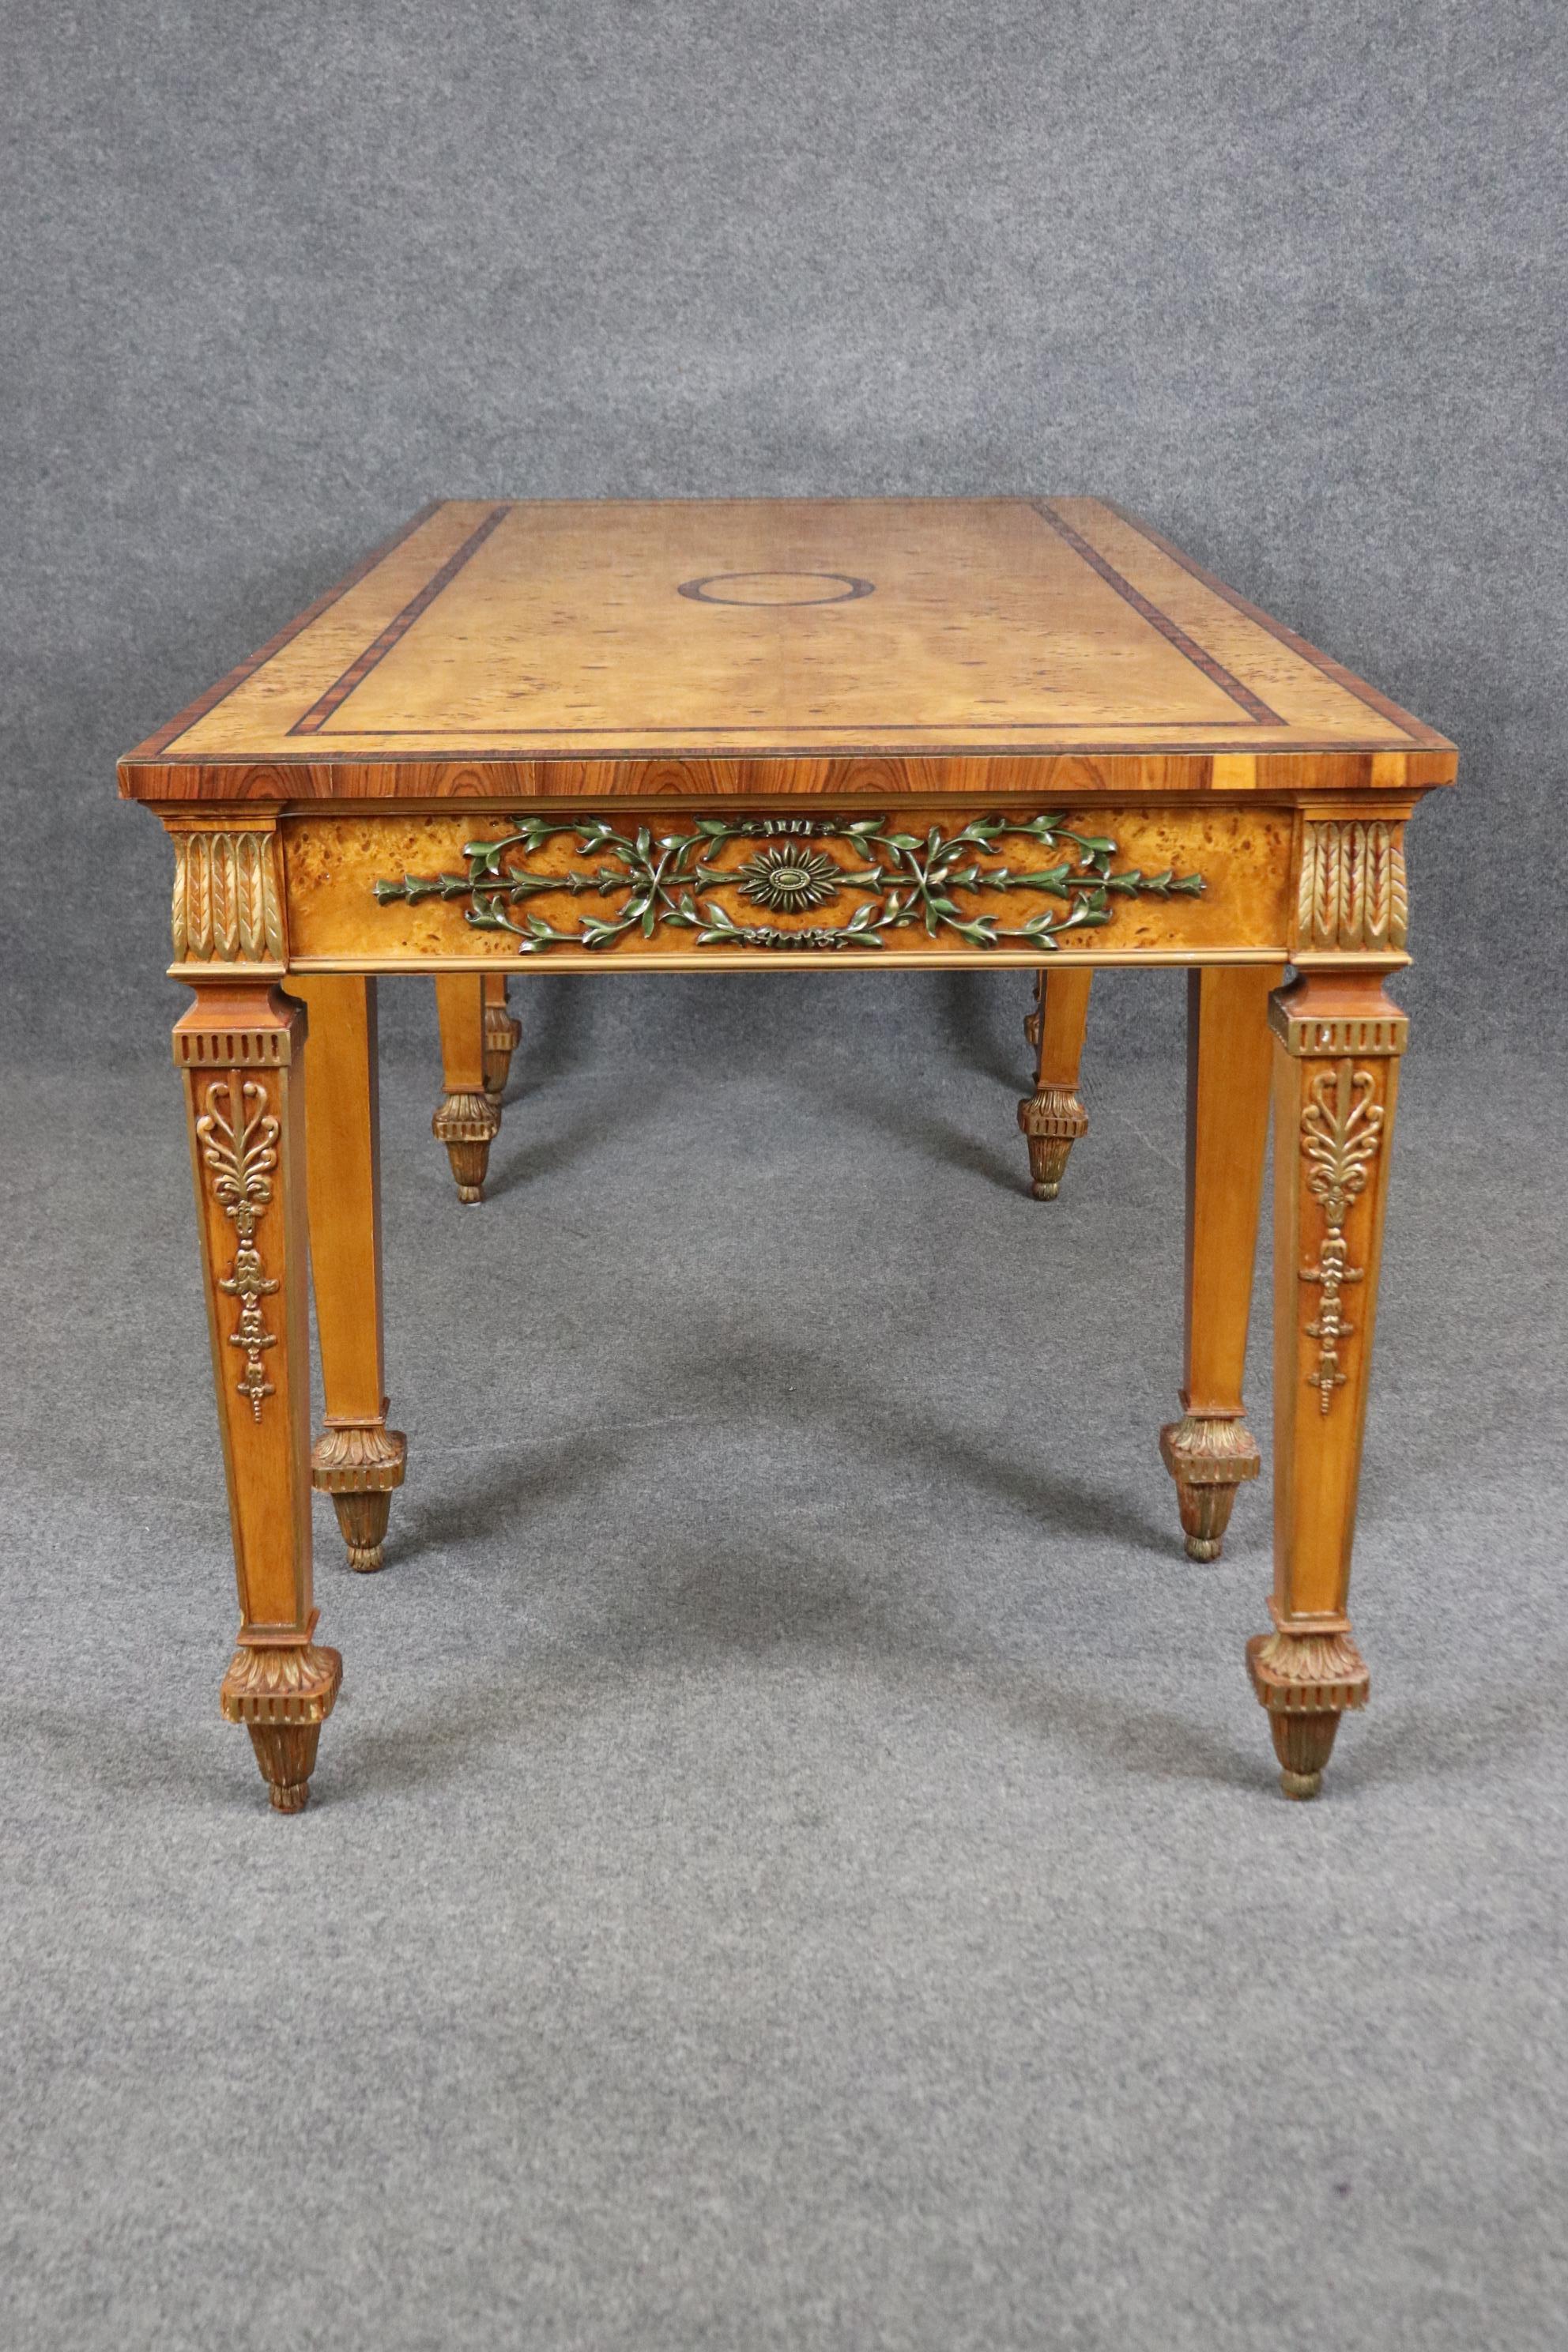 Henredon Grand Provenance English Adams Style Decorated Carved Writing Desk  In Good Condition For Sale In Swedesboro, NJ